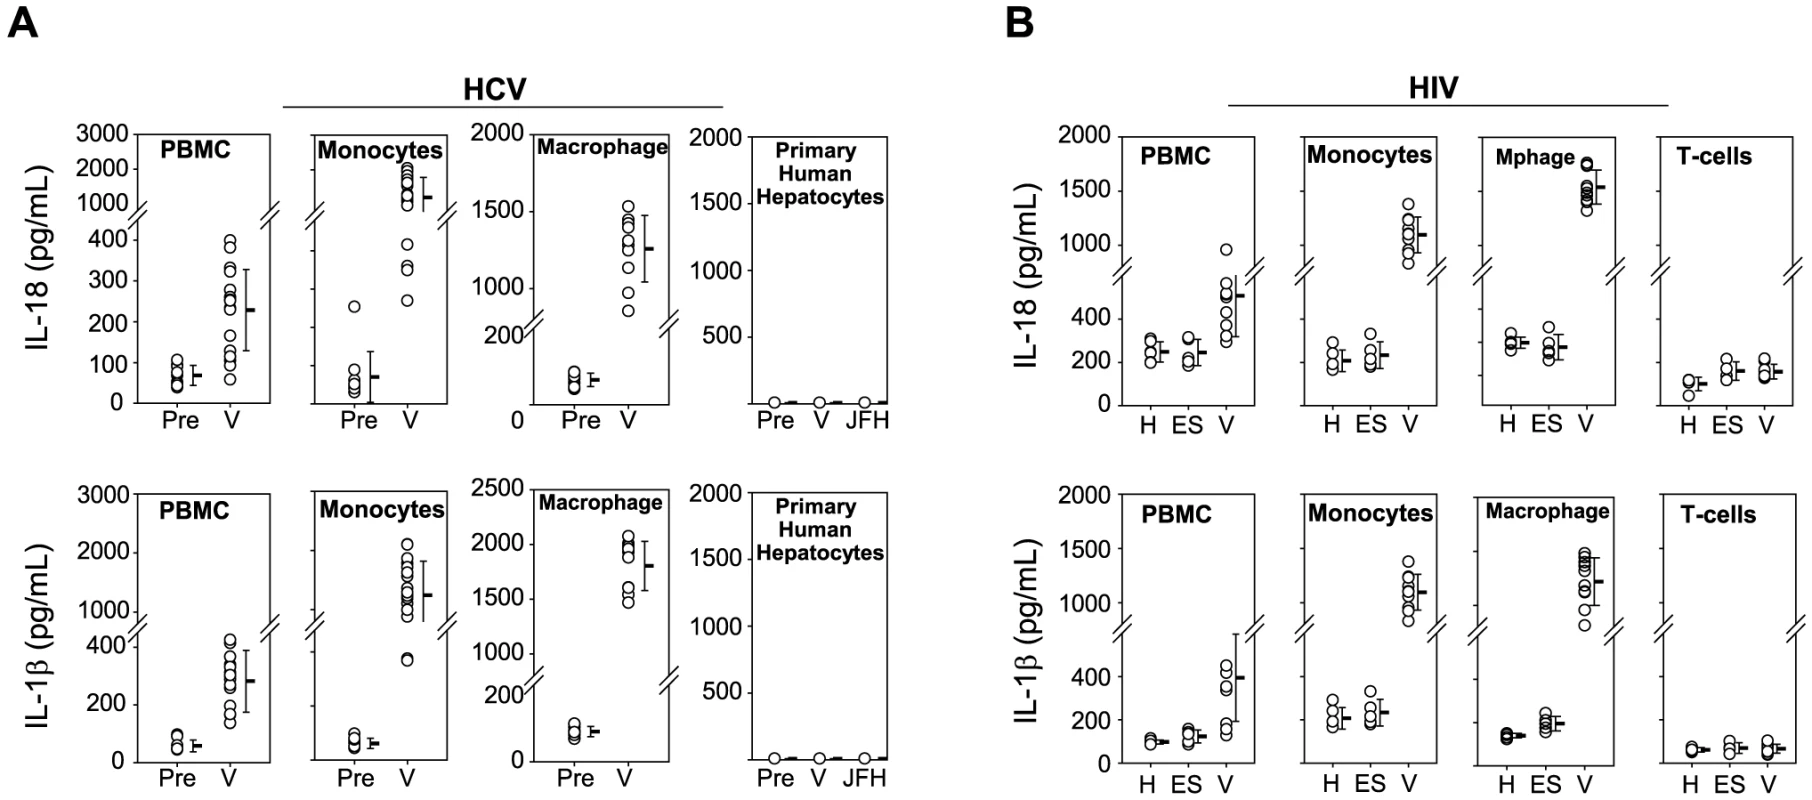 Monocytes produce inflammasome cytokines in response to HCV and HIV.